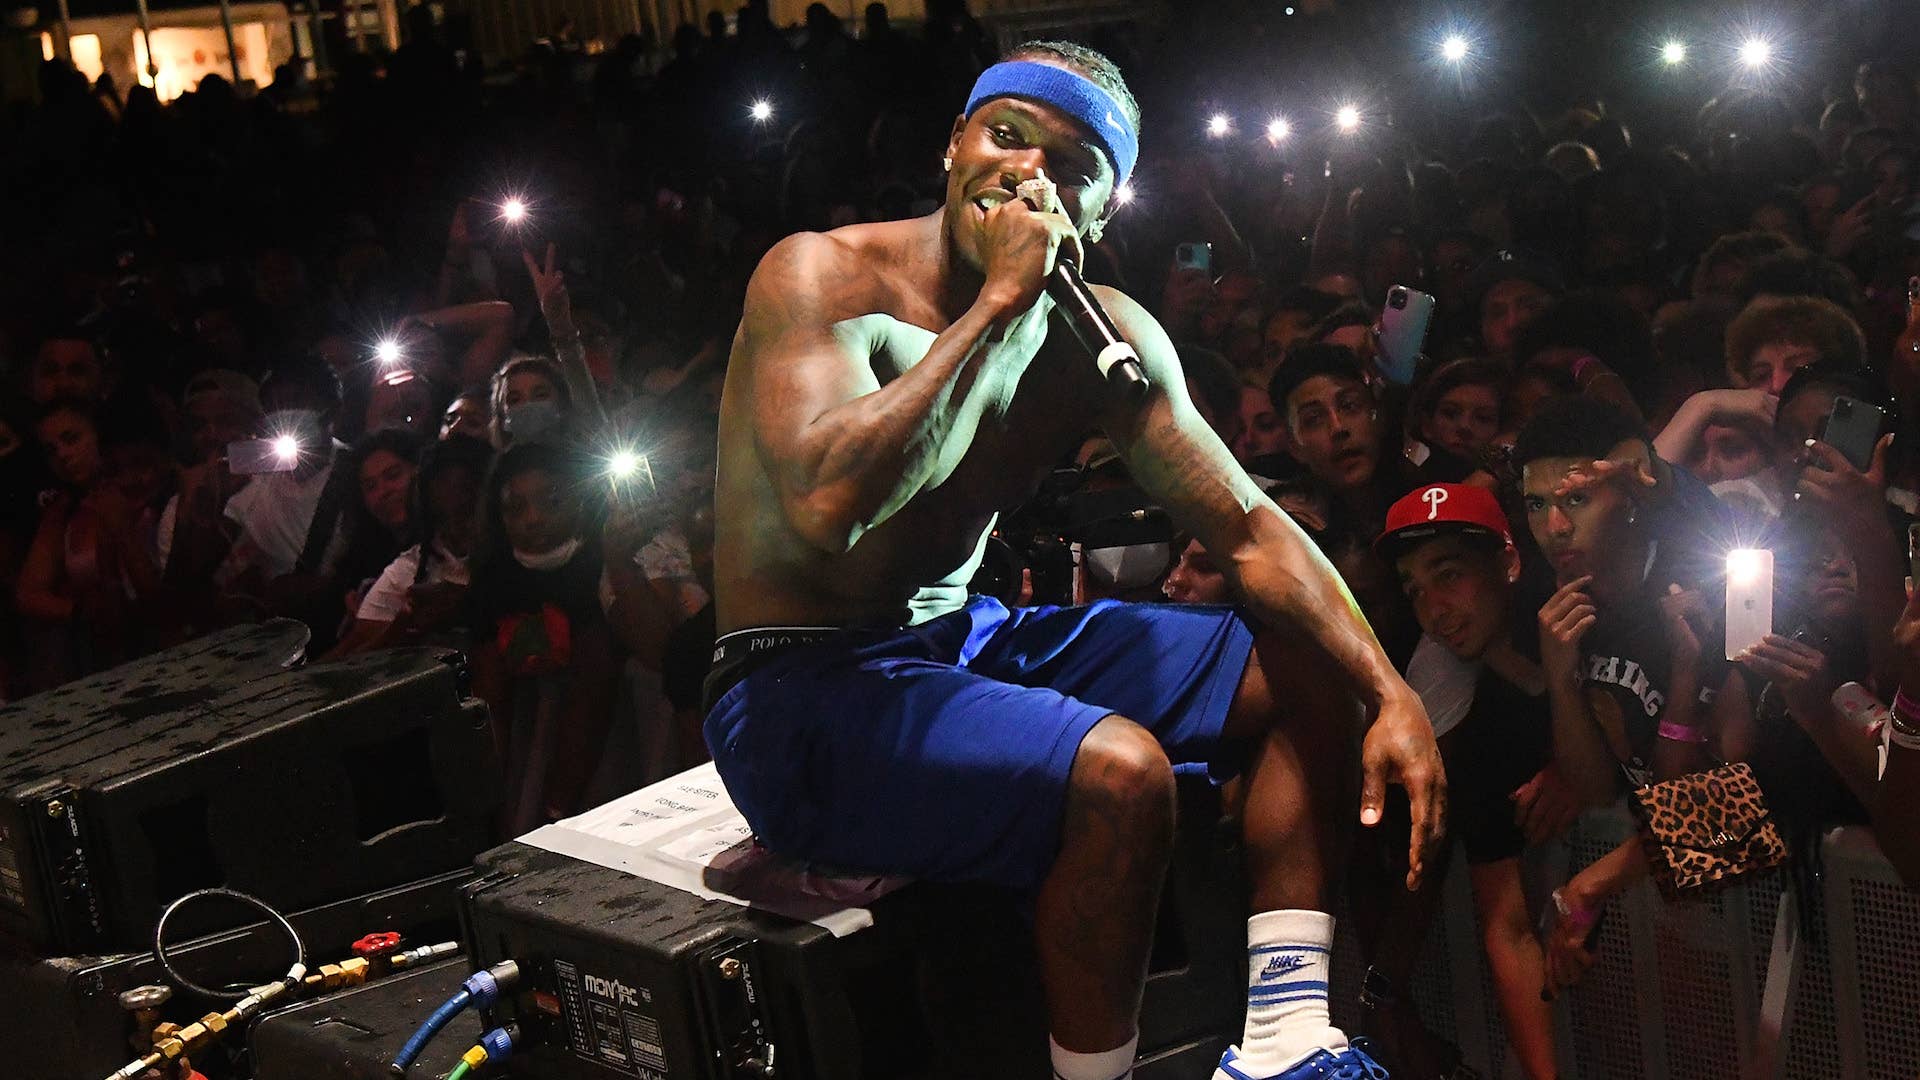 DaBaby performs during DaBaby + Friends Concert at Orlando Amphitheater